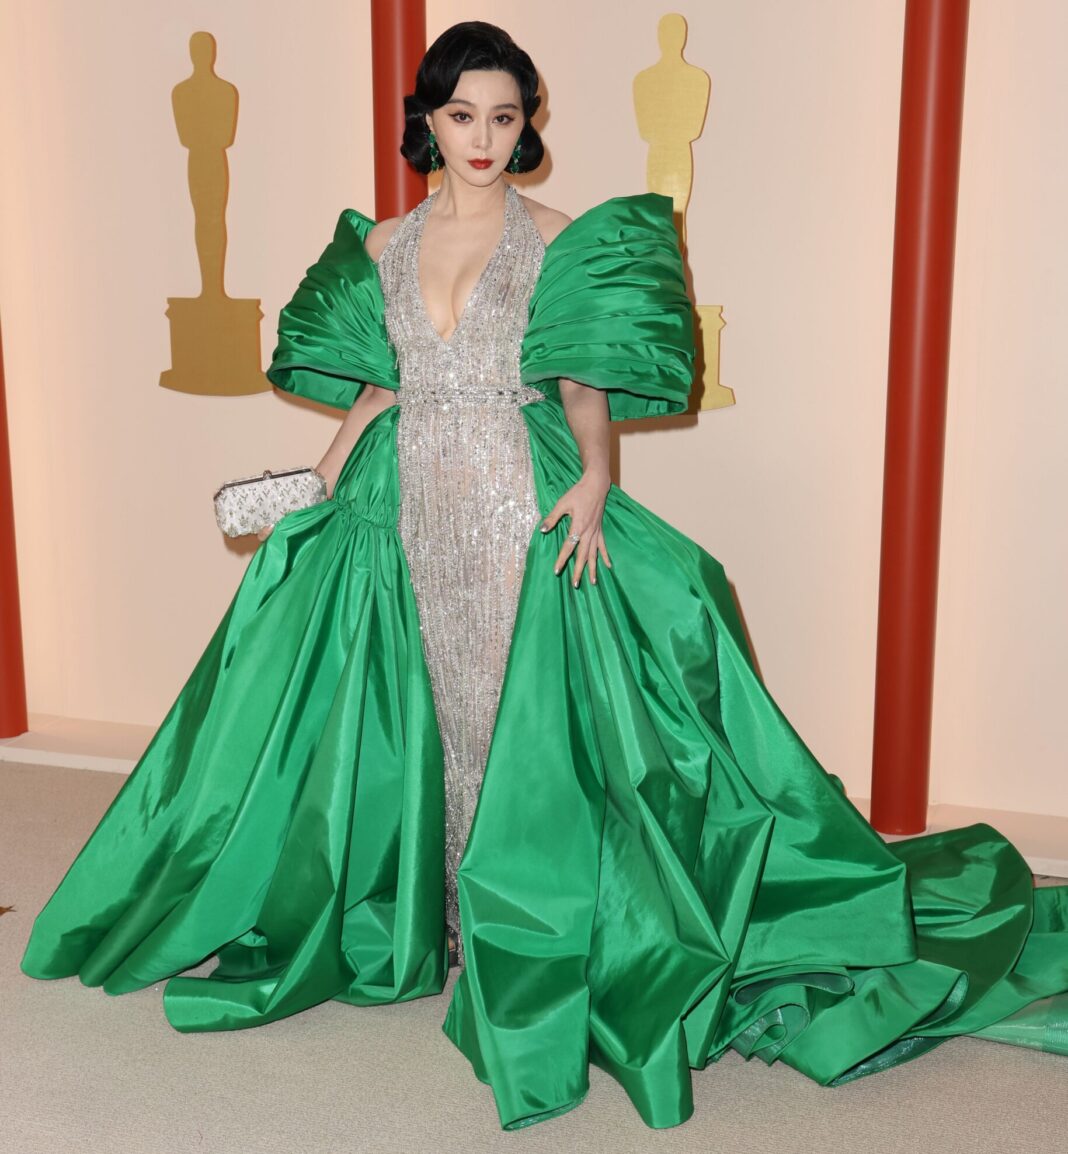 Fan Bingbing at the 95th Annual Academy Awards in March 2023.